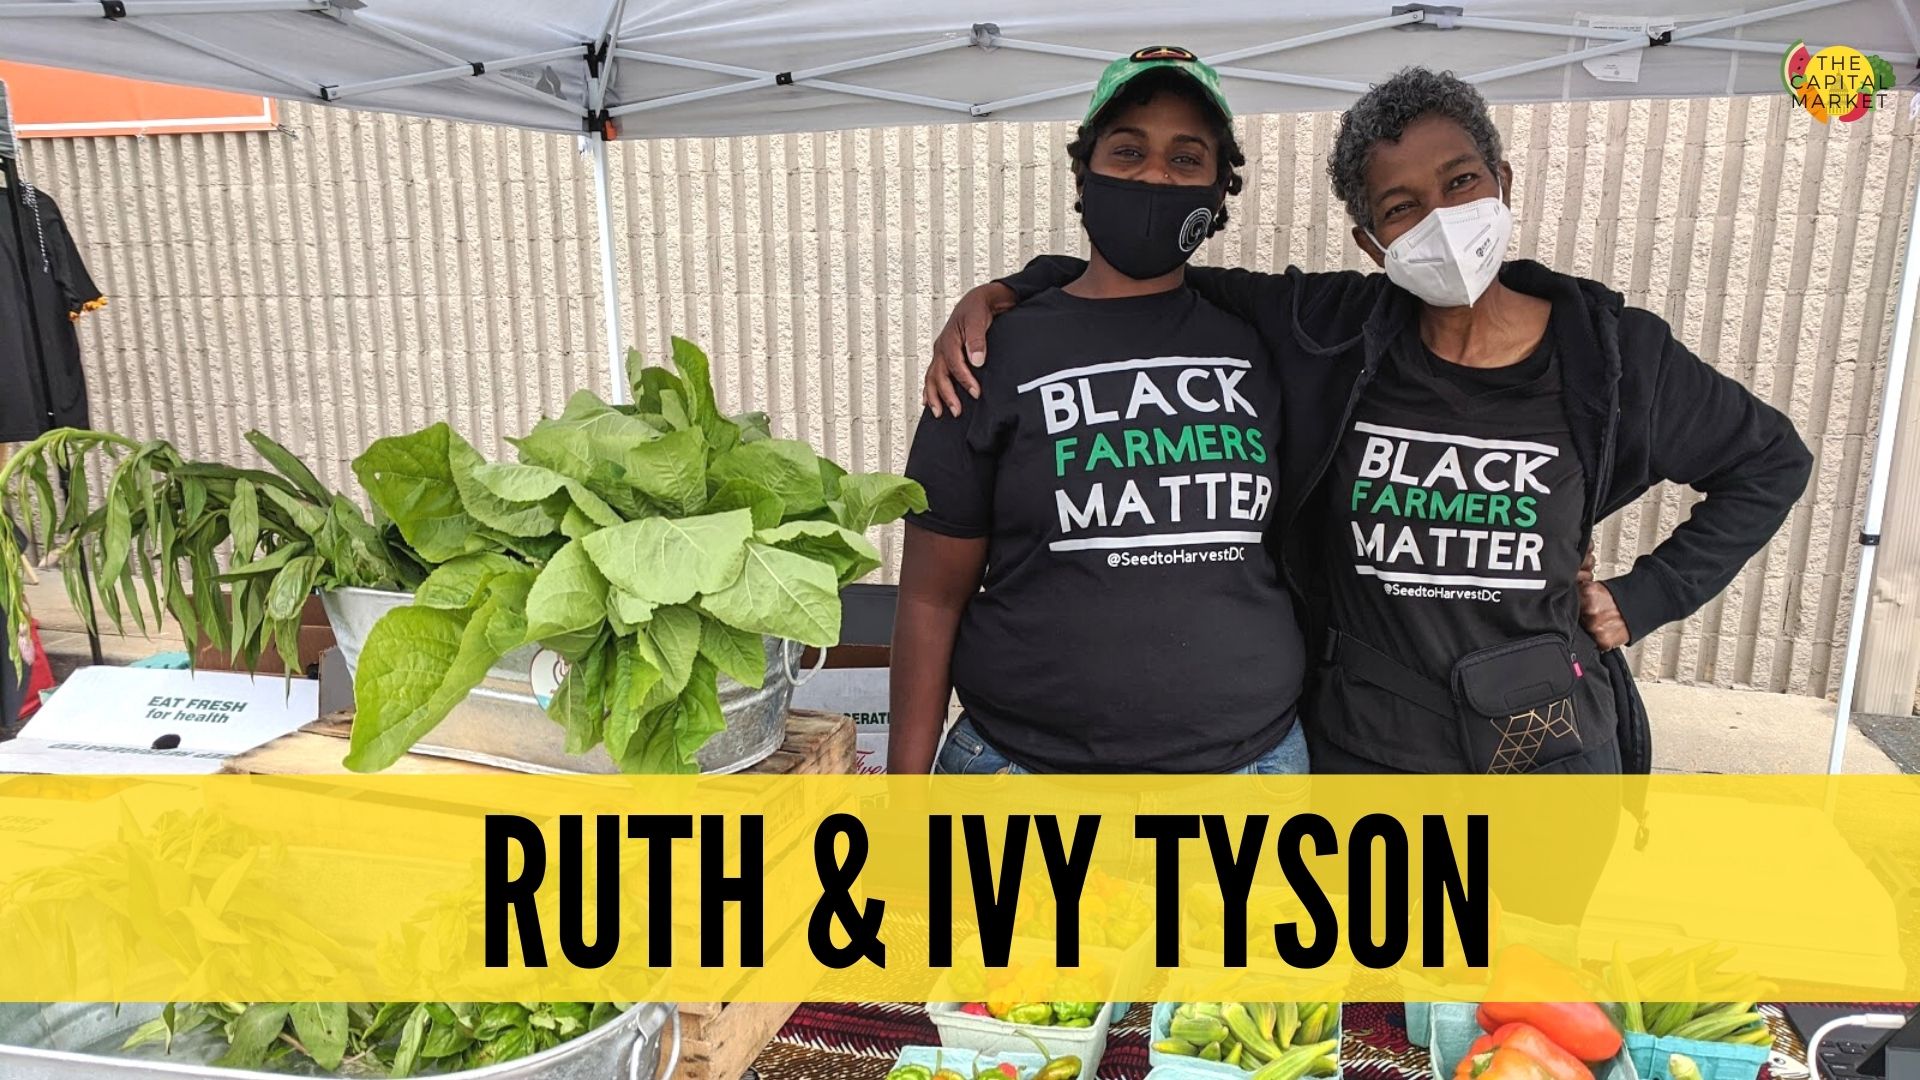 Business Profile: Ruth & Ivy Tyson